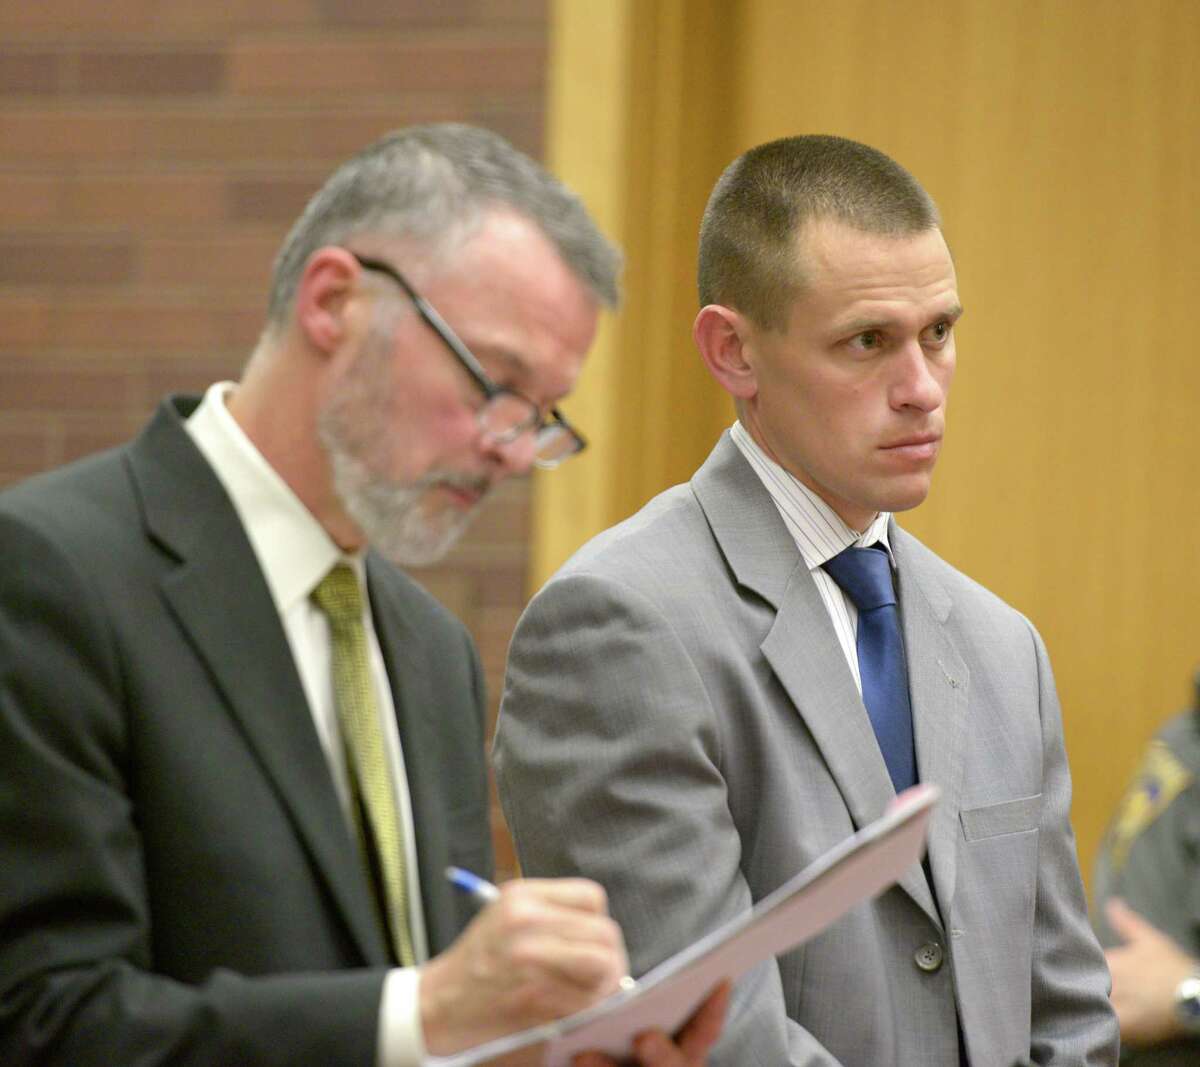 File photo of Kyle Seitz, of Ridgefield, right, in Danbury Superior Court for his arraignment on charges of criminally negligent homicide in the death of his 15-month old son, Benjamin, who died after being left in a hot car. Appearing with Seitz is his attorney John Gulash, left, on Wednesday, November 12, 2014, in Danbury, Conn.